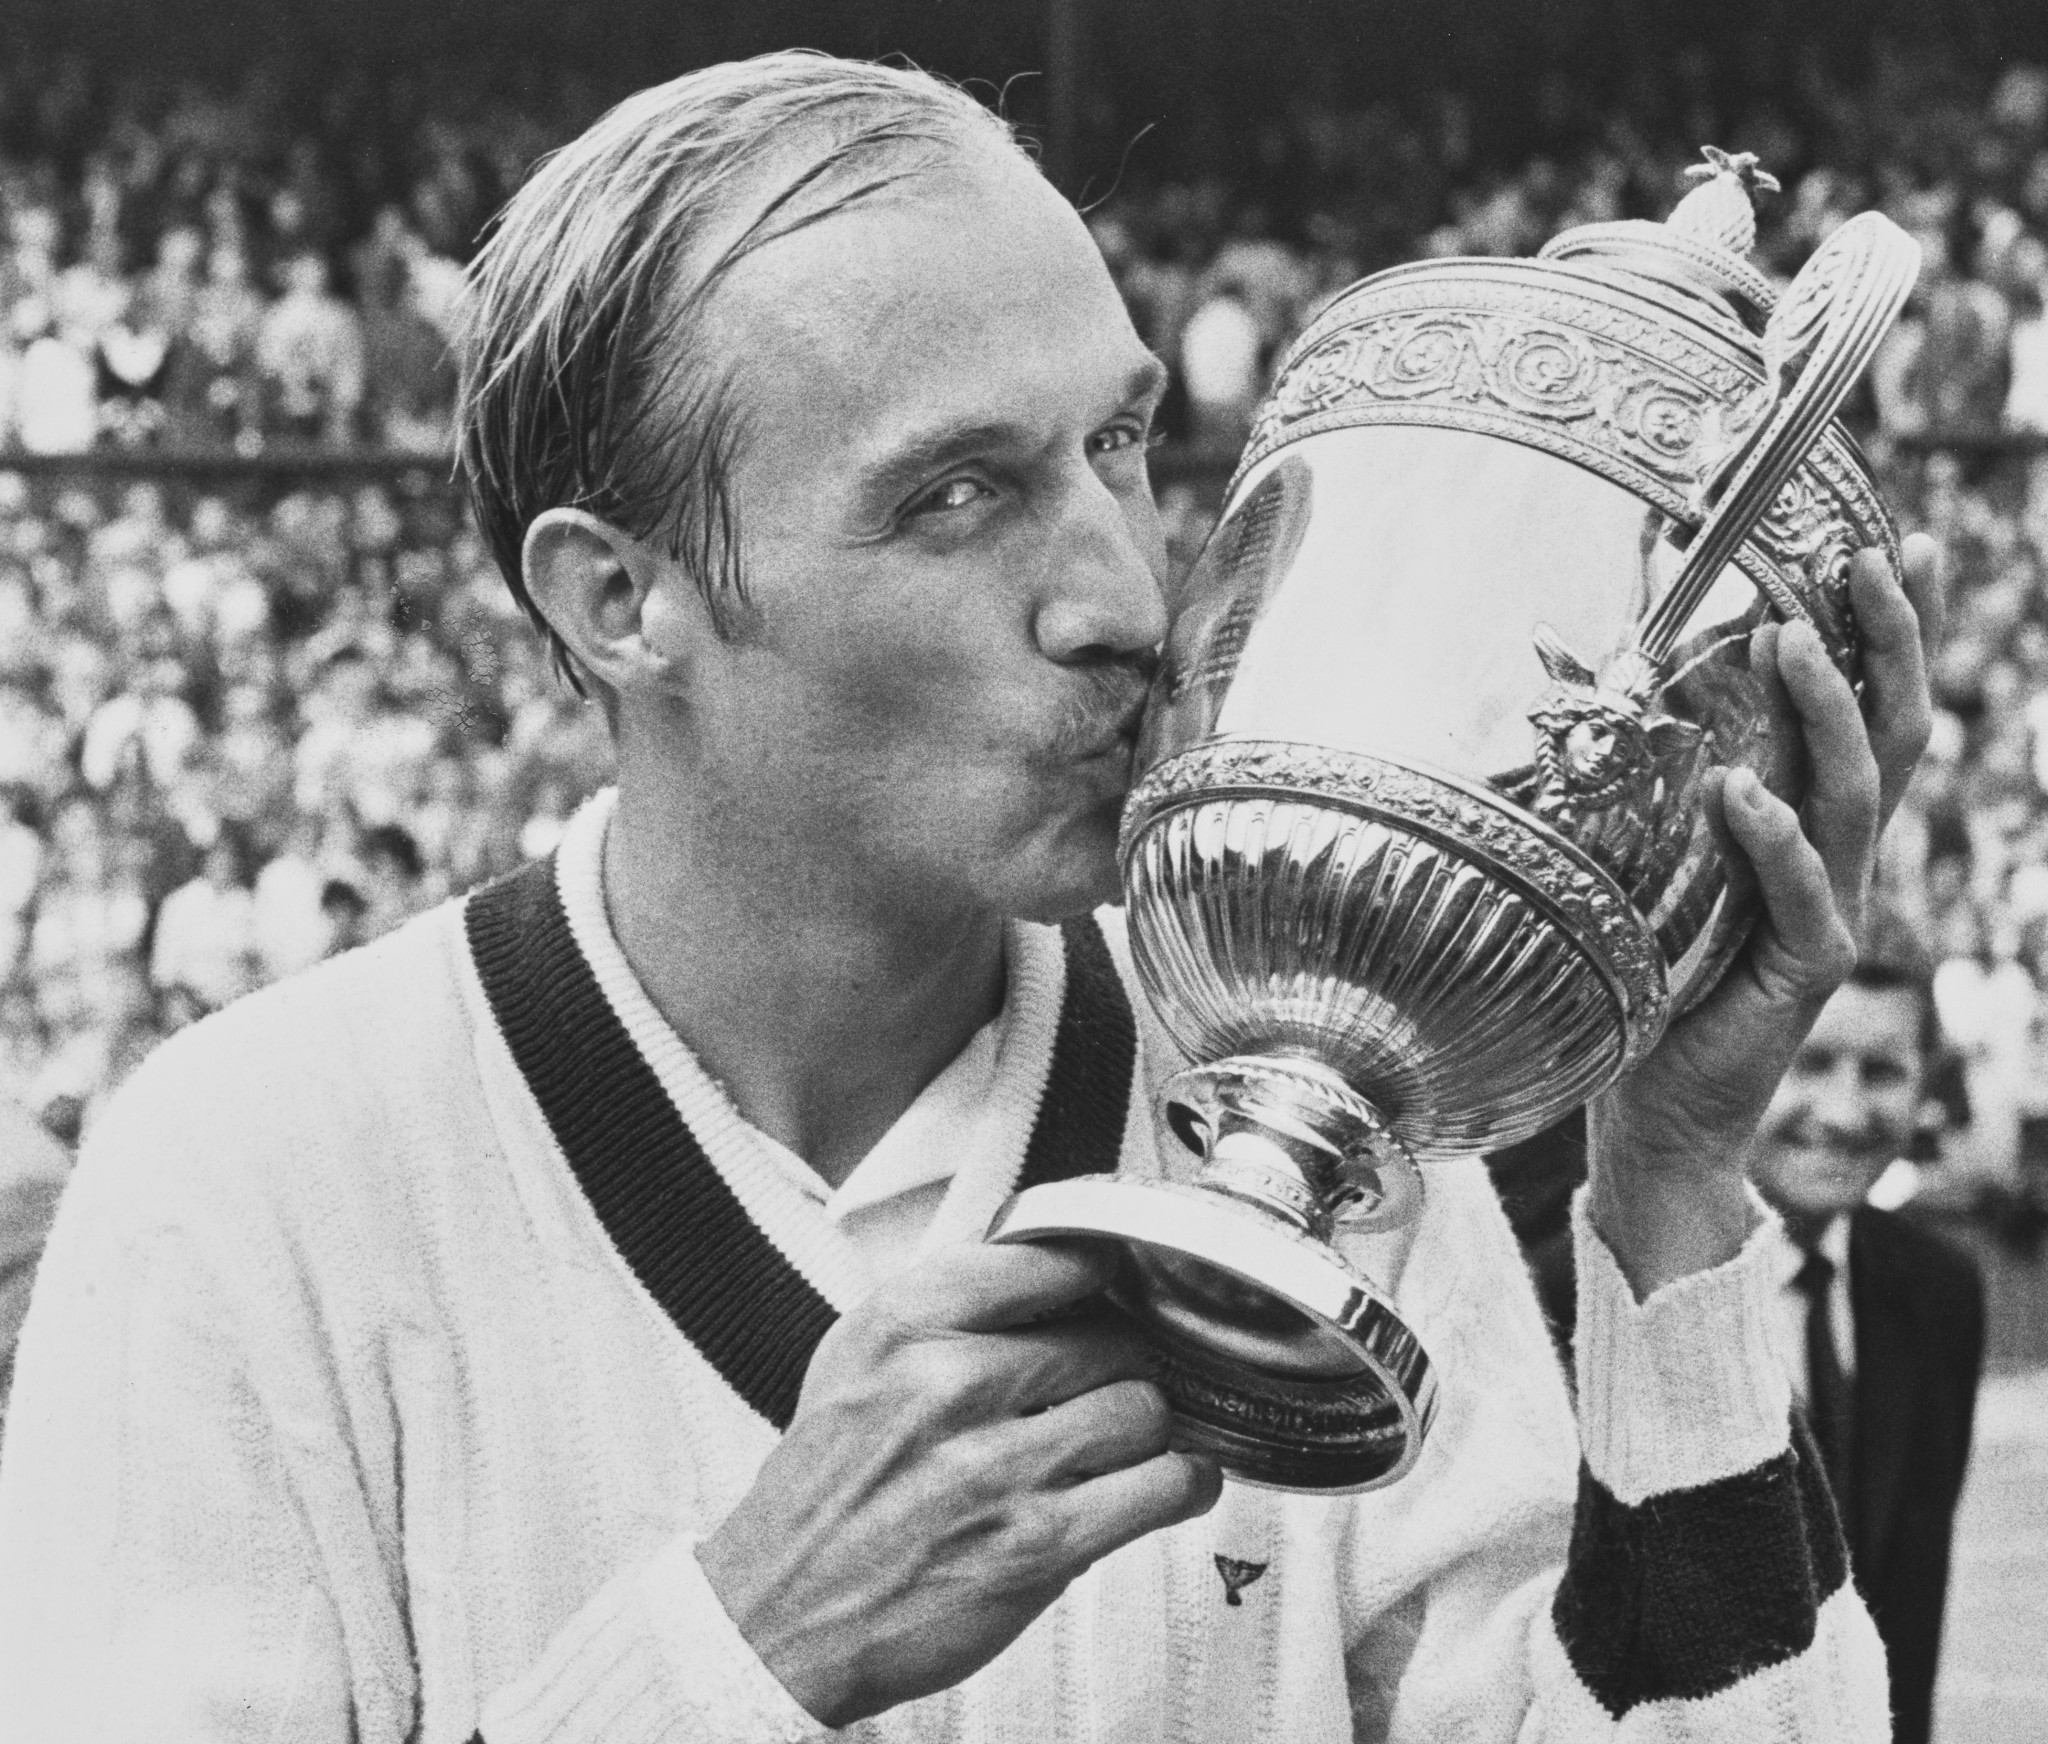 Stan Smith of the United States won two singles Grand Slams as a player, including Wimbledon in 1972 ©Getty Images